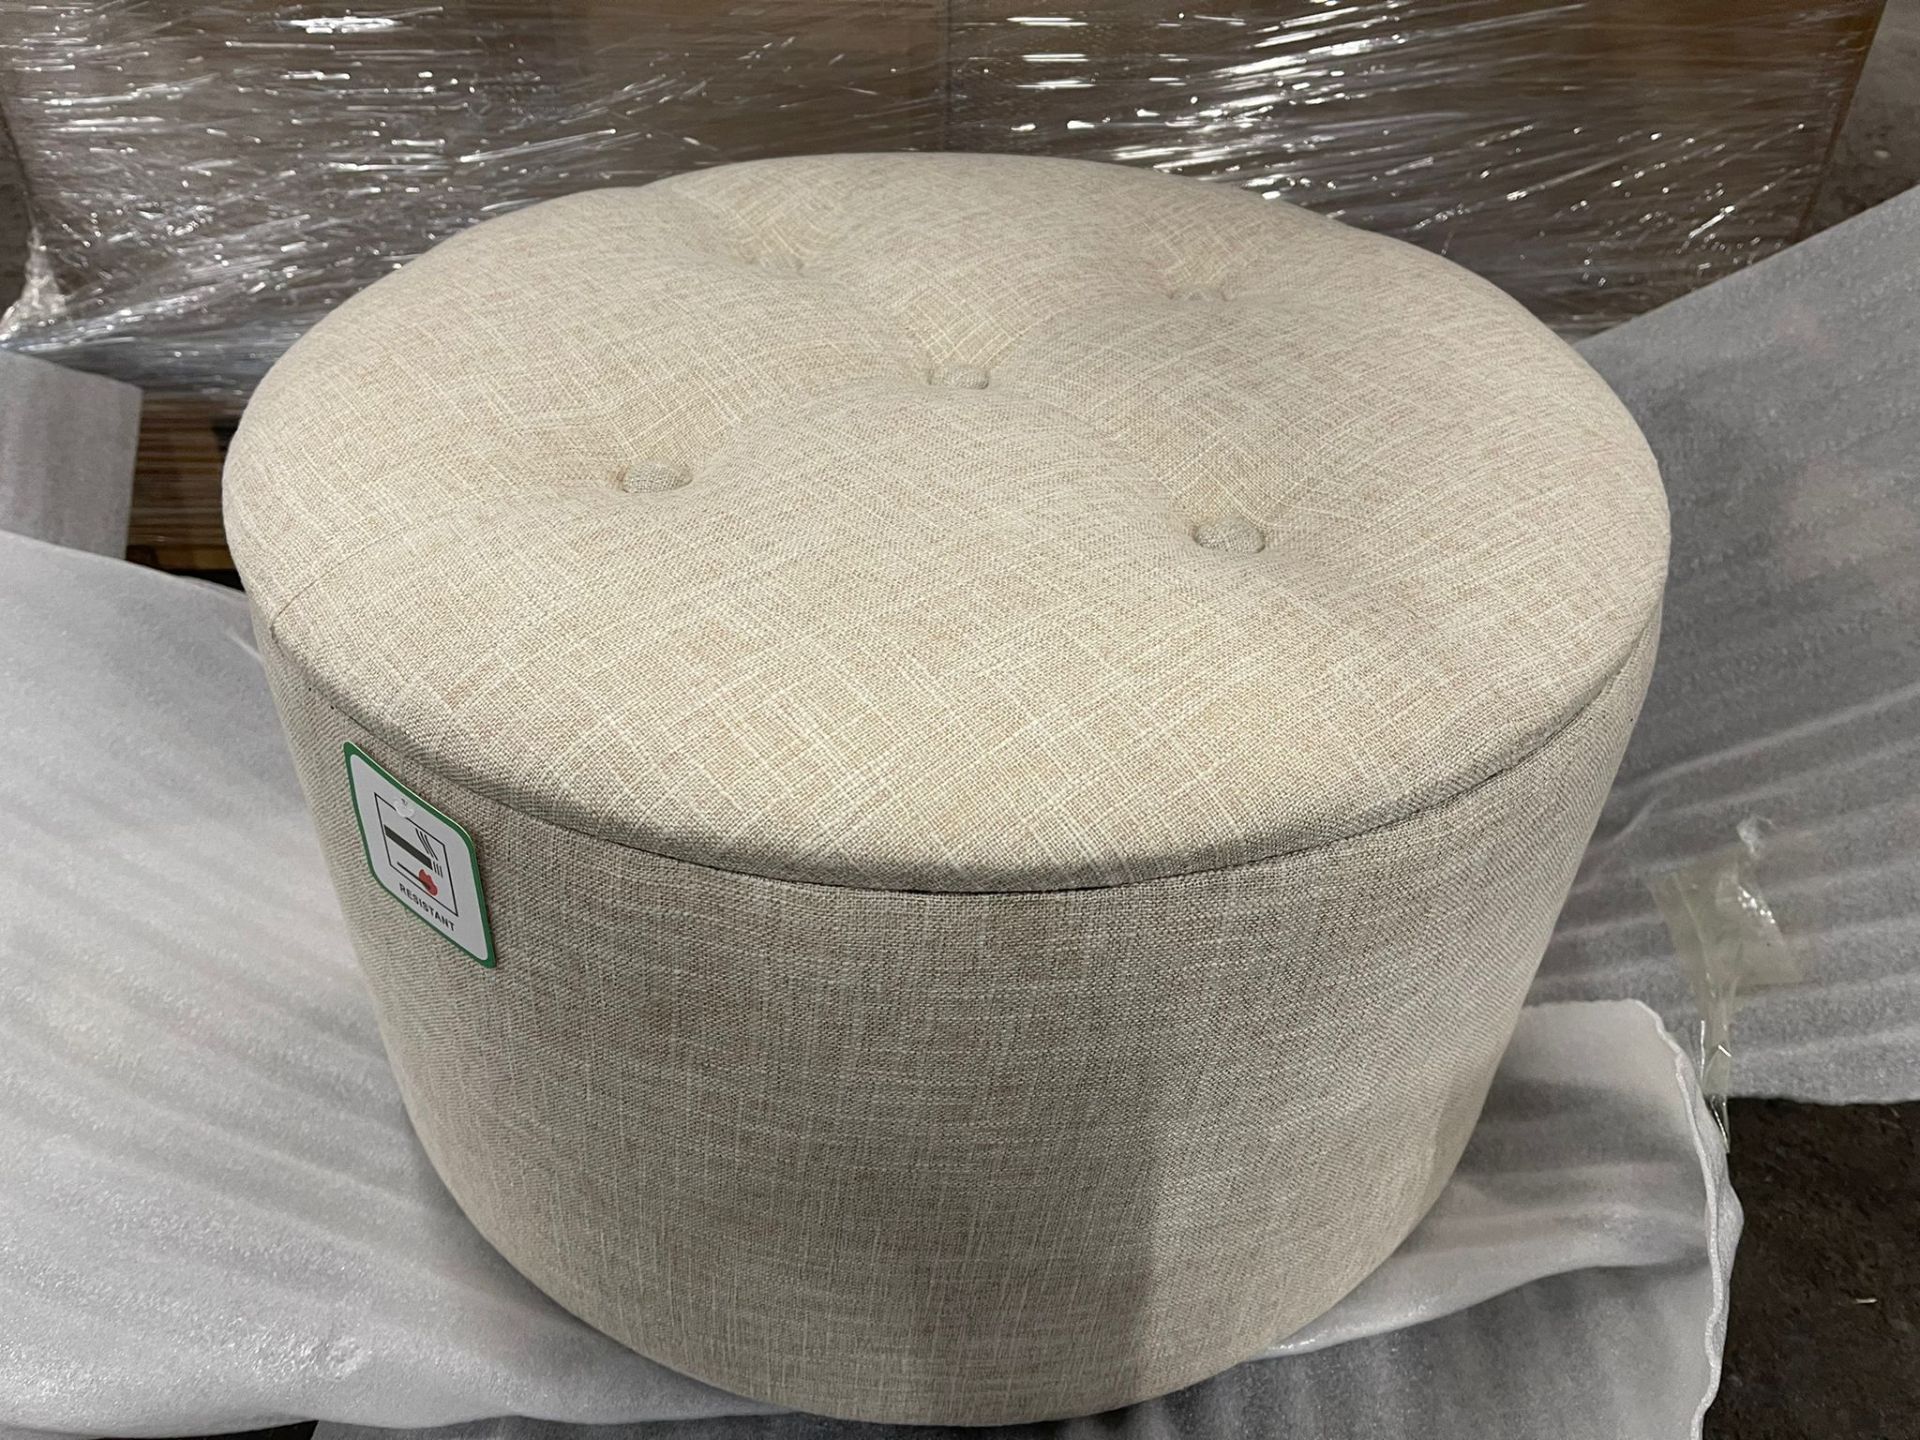 NEW LARGE CREAM ROUND 53CM OTTOMAN WITH STORAGE POCKETS - This round ottoman comes complete with a